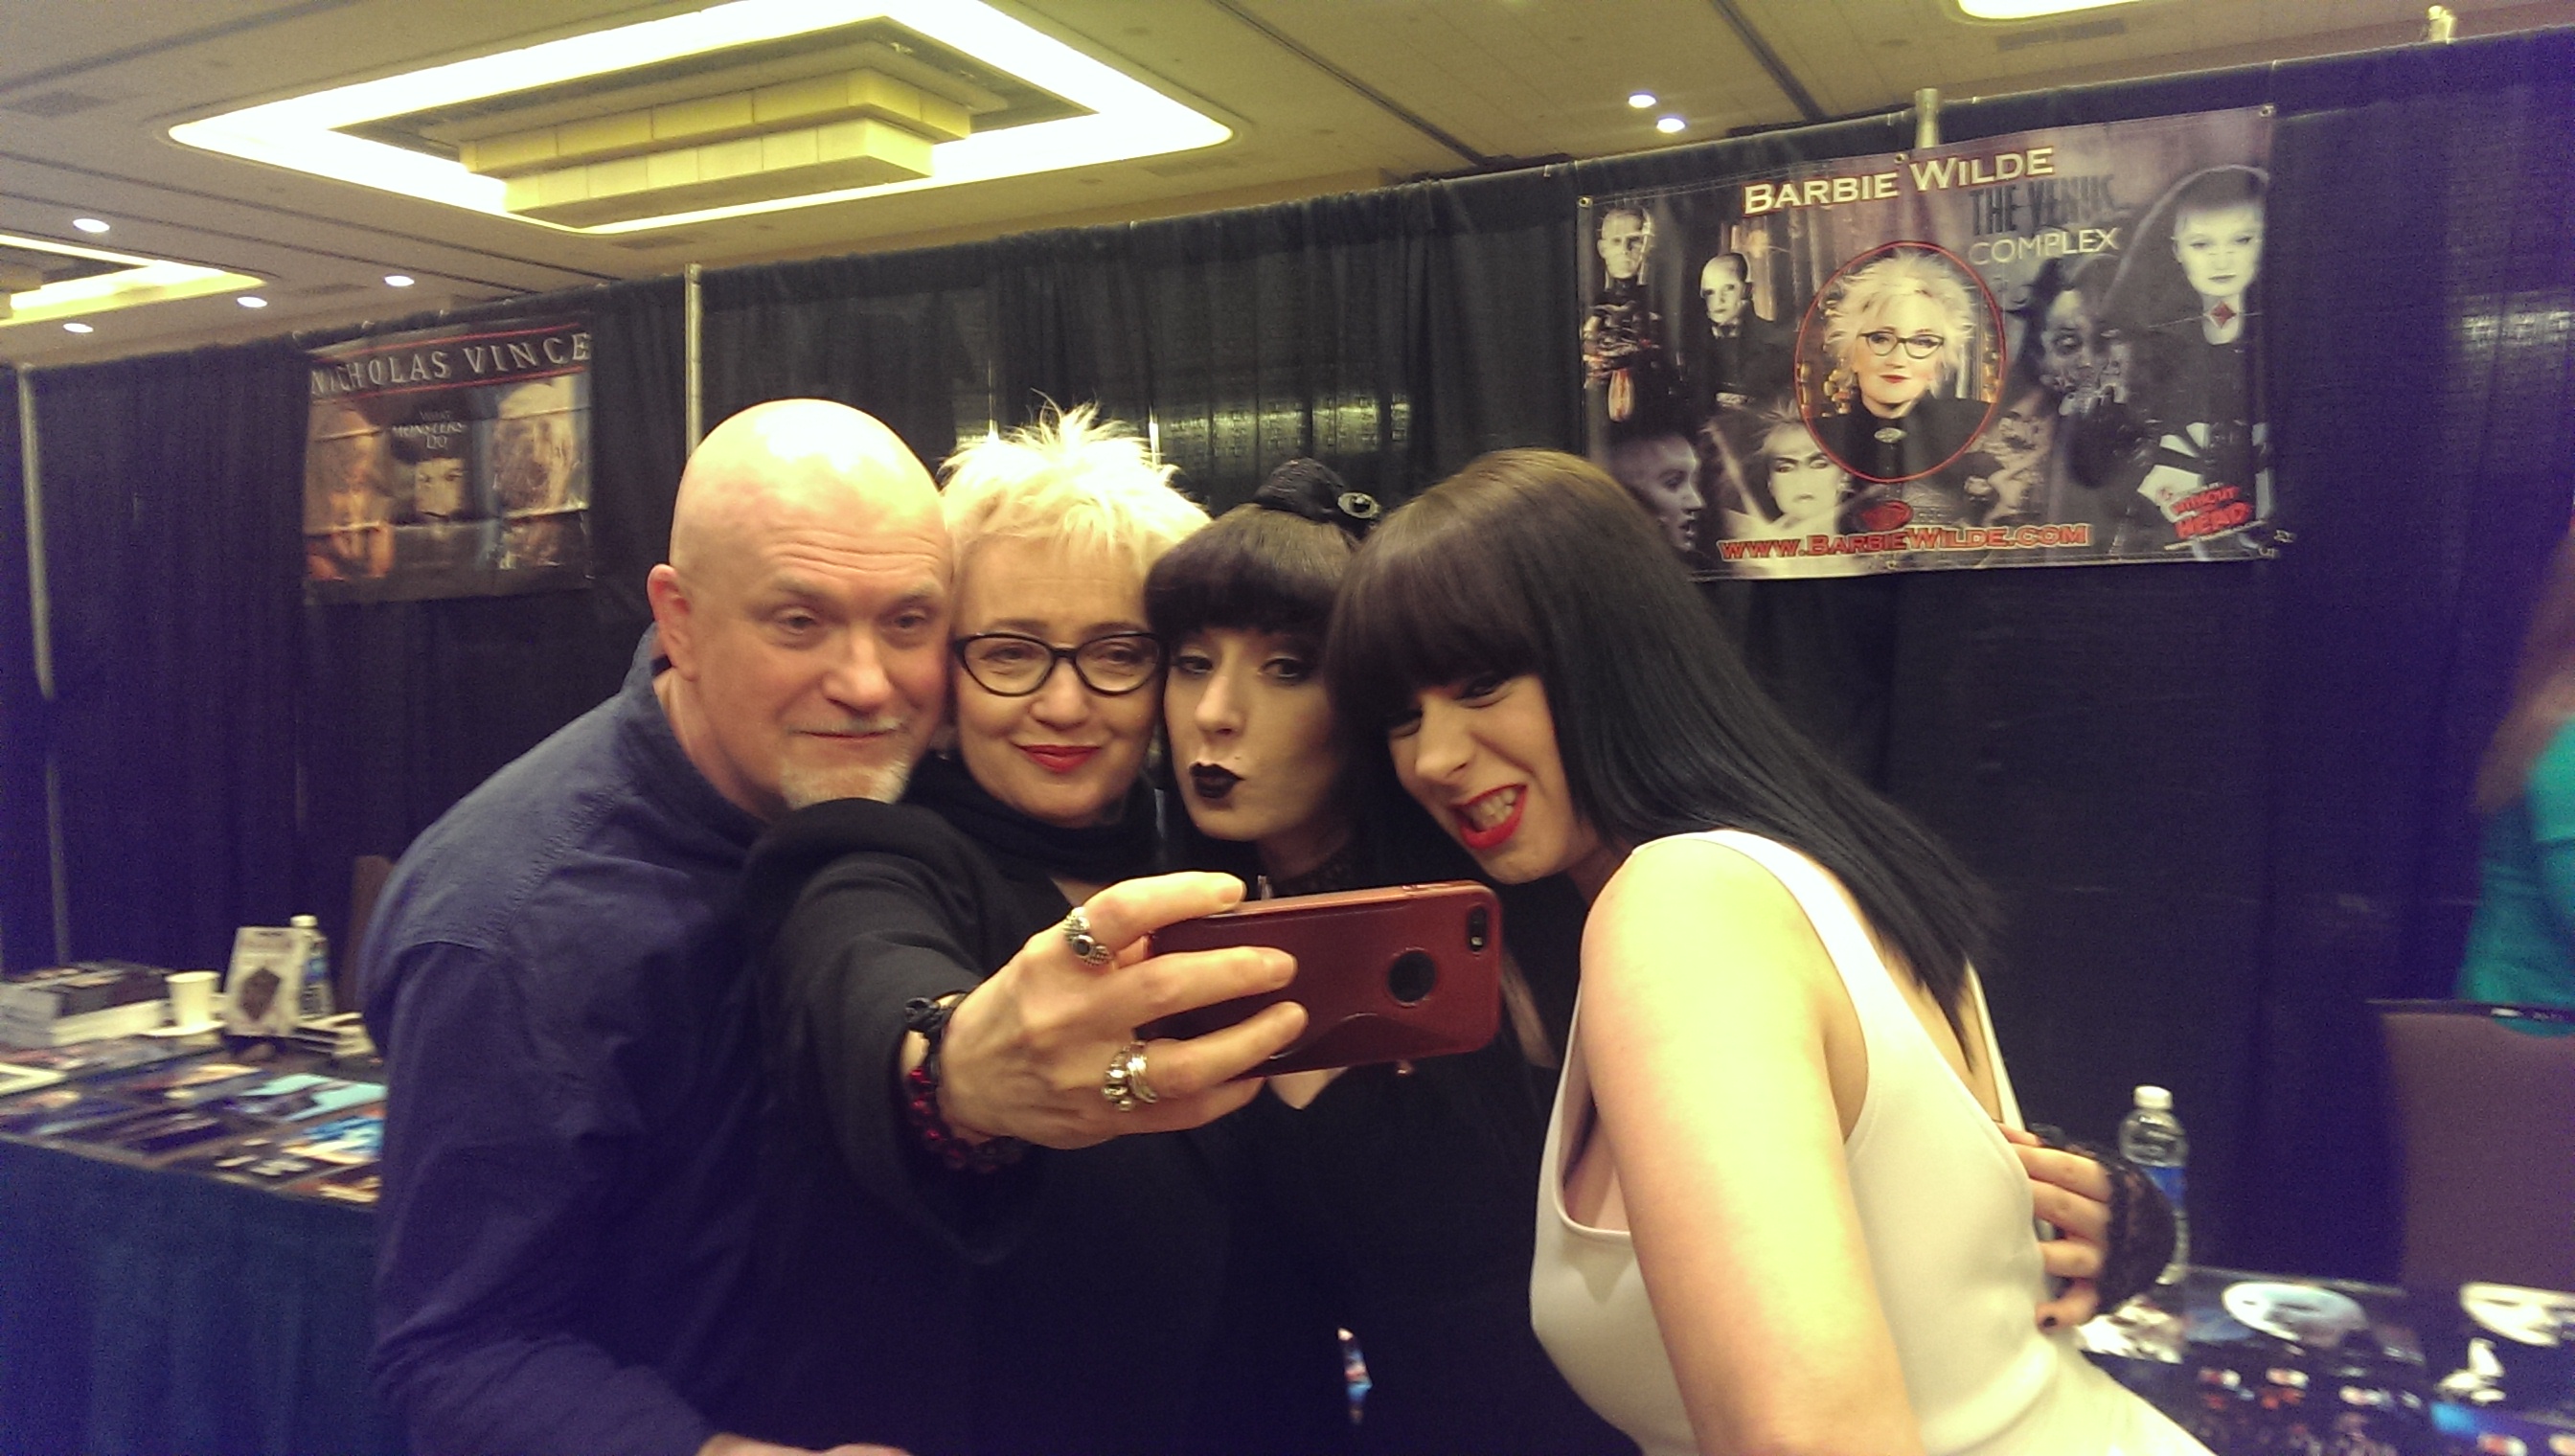 Sylvia (far right) and her twin sister, Jen (middle right), with Barbie Wilde (middle left), and Nicholas Vince (far left) at Texas Frightmare Weekend.